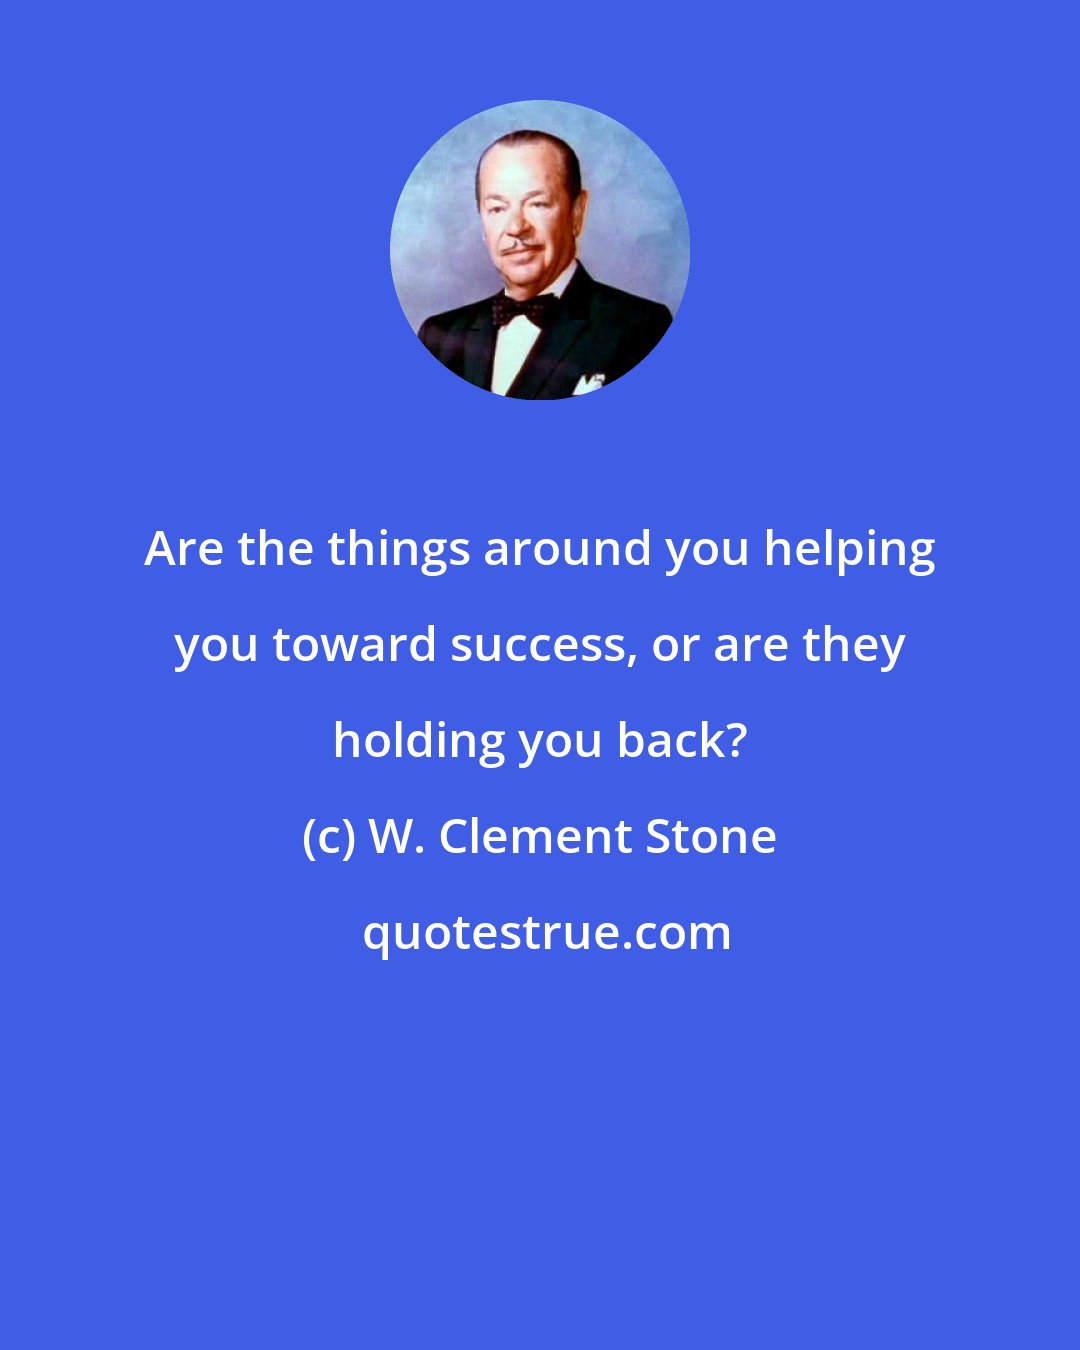 W. Clement Stone: Are the things around you helping you toward success, or are they holding you back?